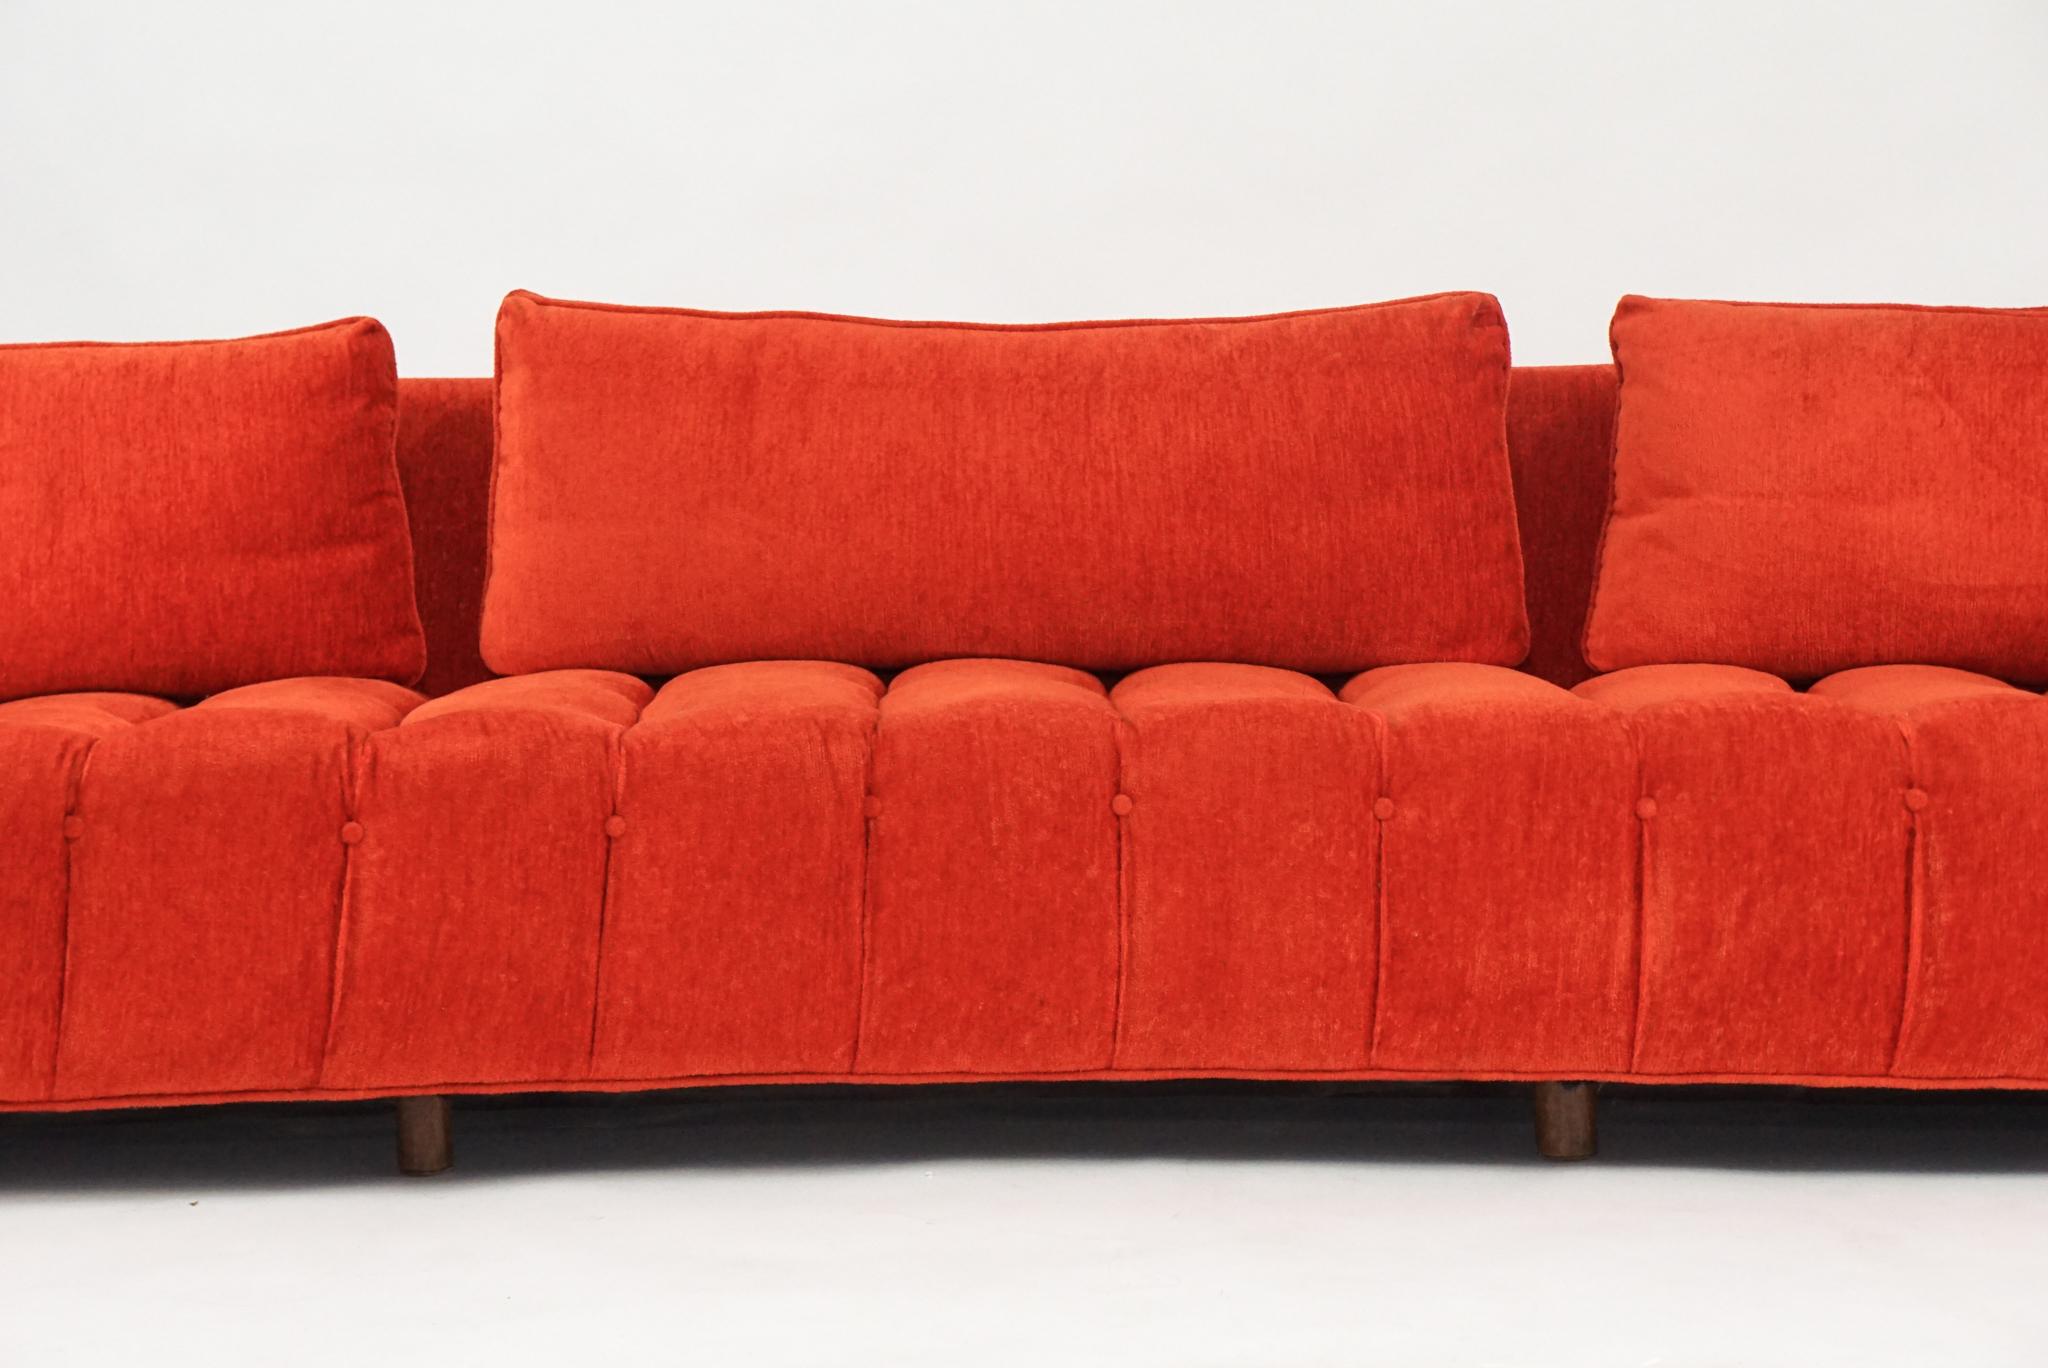 20th Century Mid-Century Modern Sculptural Curved Tufted Erwin Lambeth Sofa in Red